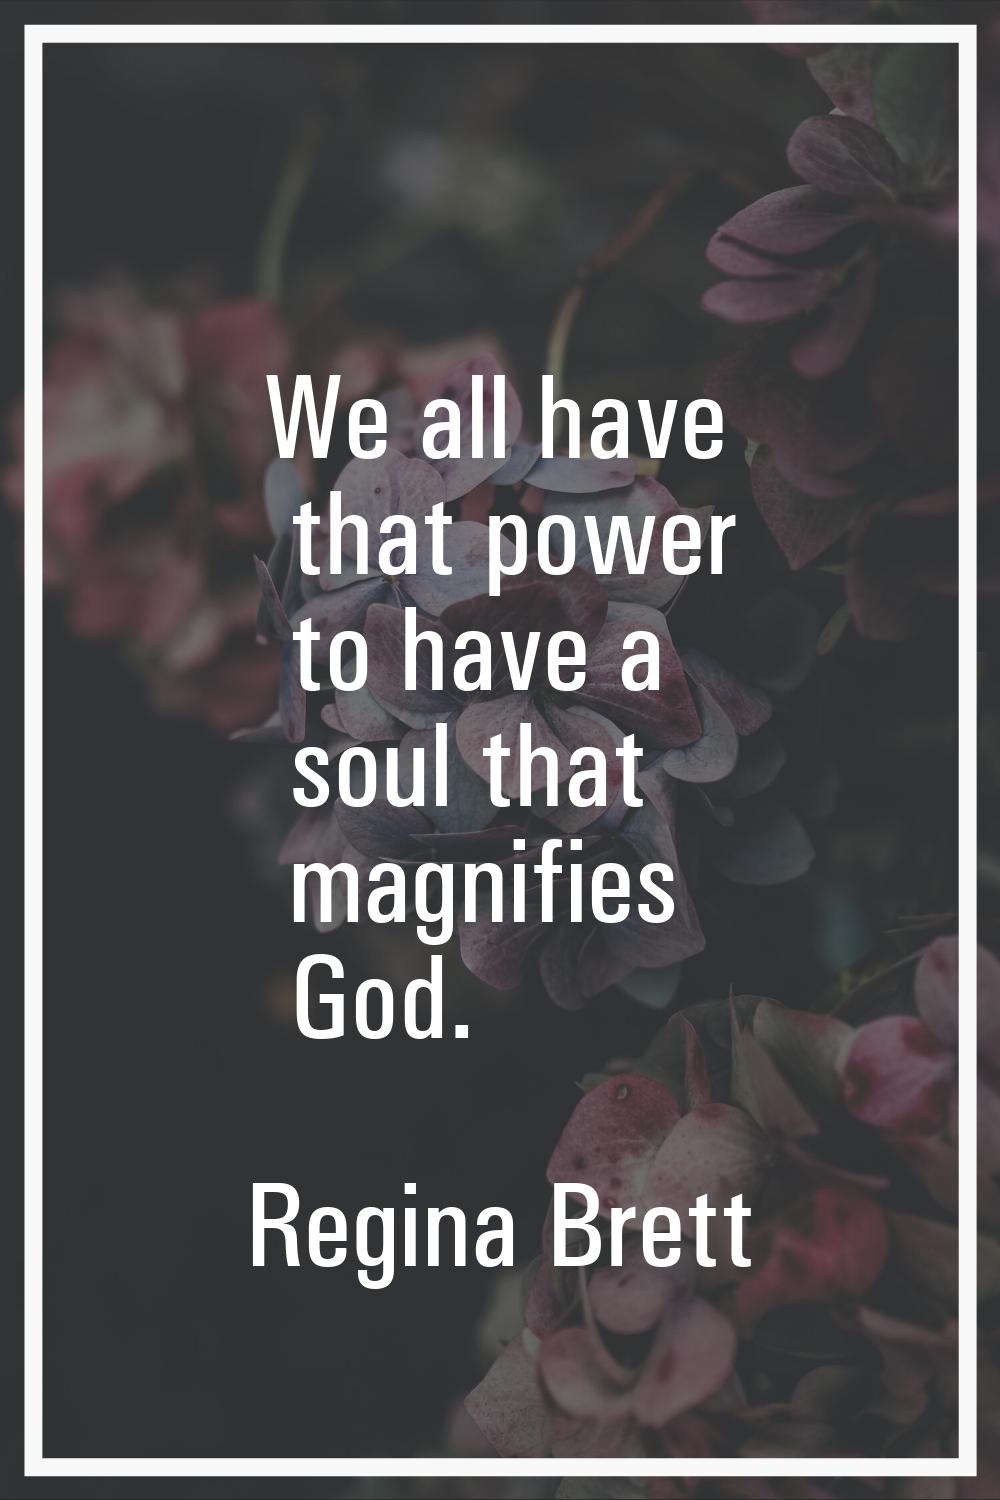 We all have that power to have a soul that magnifies God.